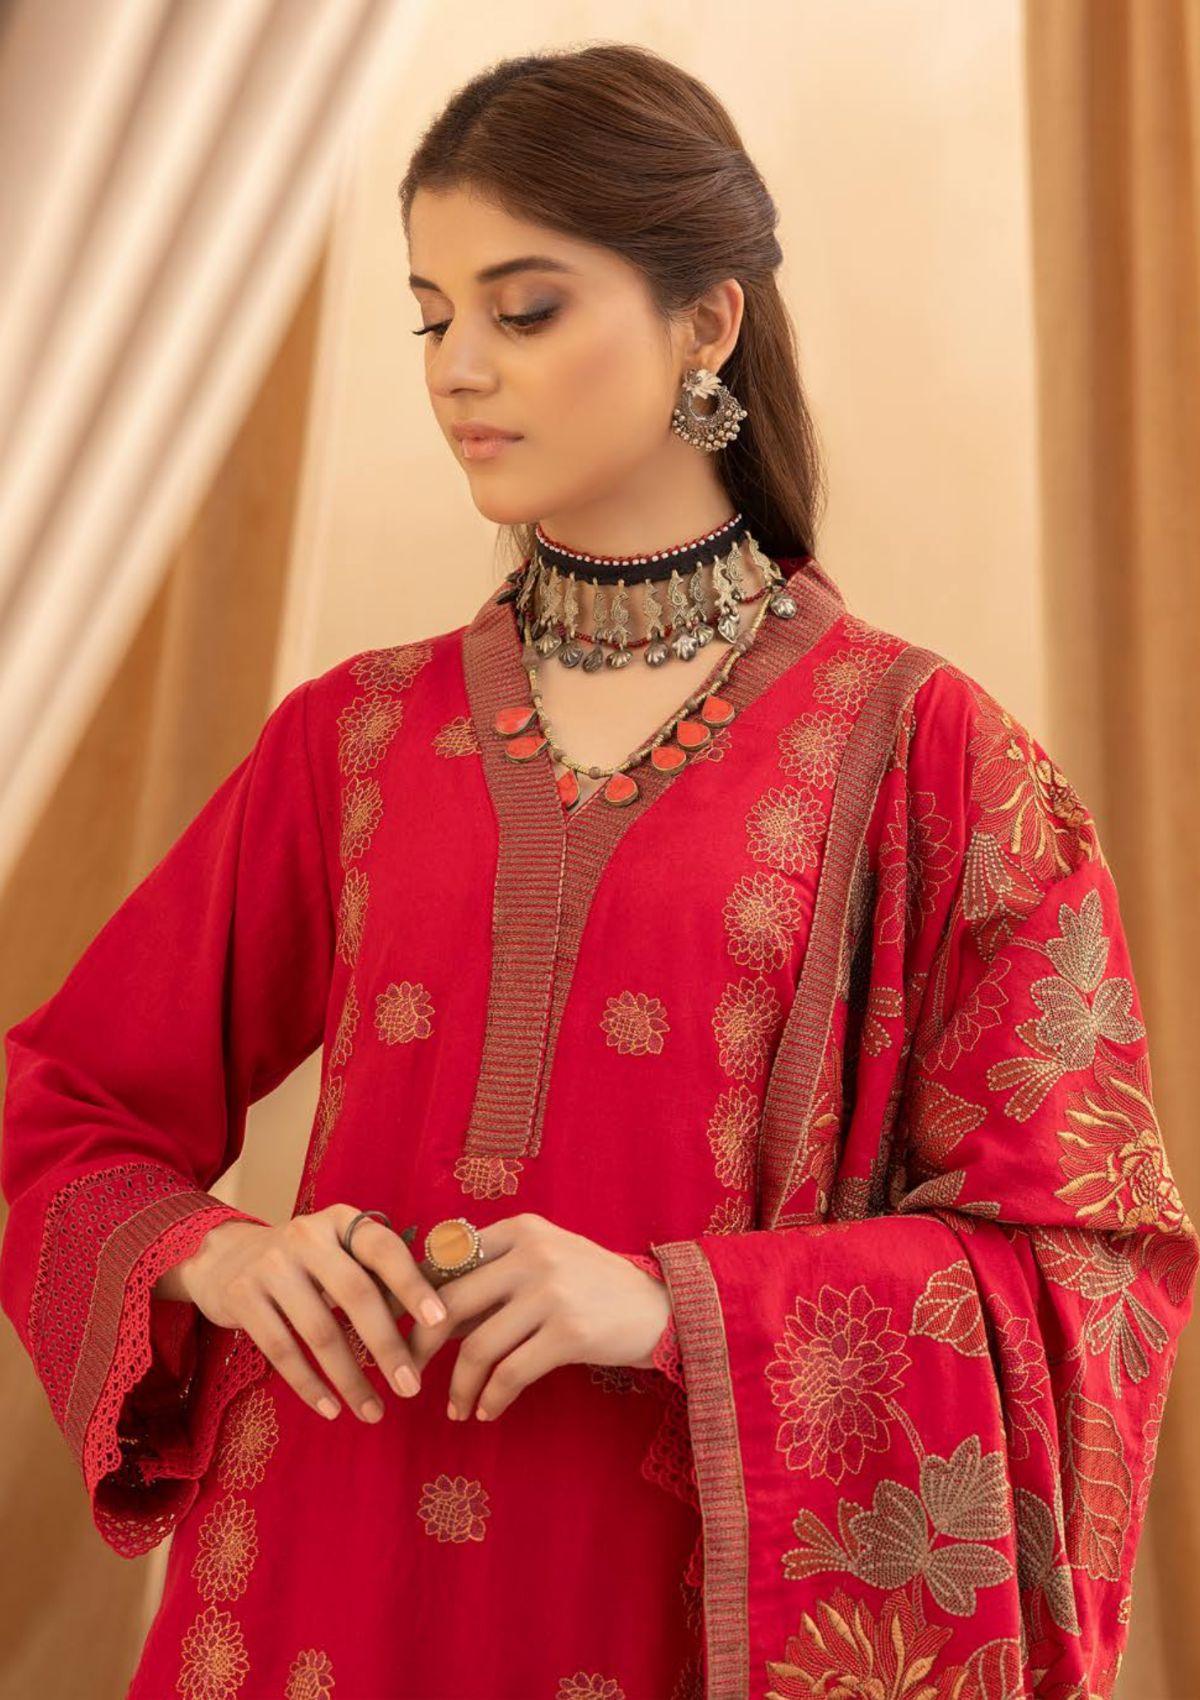 Khoobsurat' omnia-winter-Embroidered-&-Printed-Dress-is-available-at-Mohsin-Saeed-Fabrics-Online-Shopping--